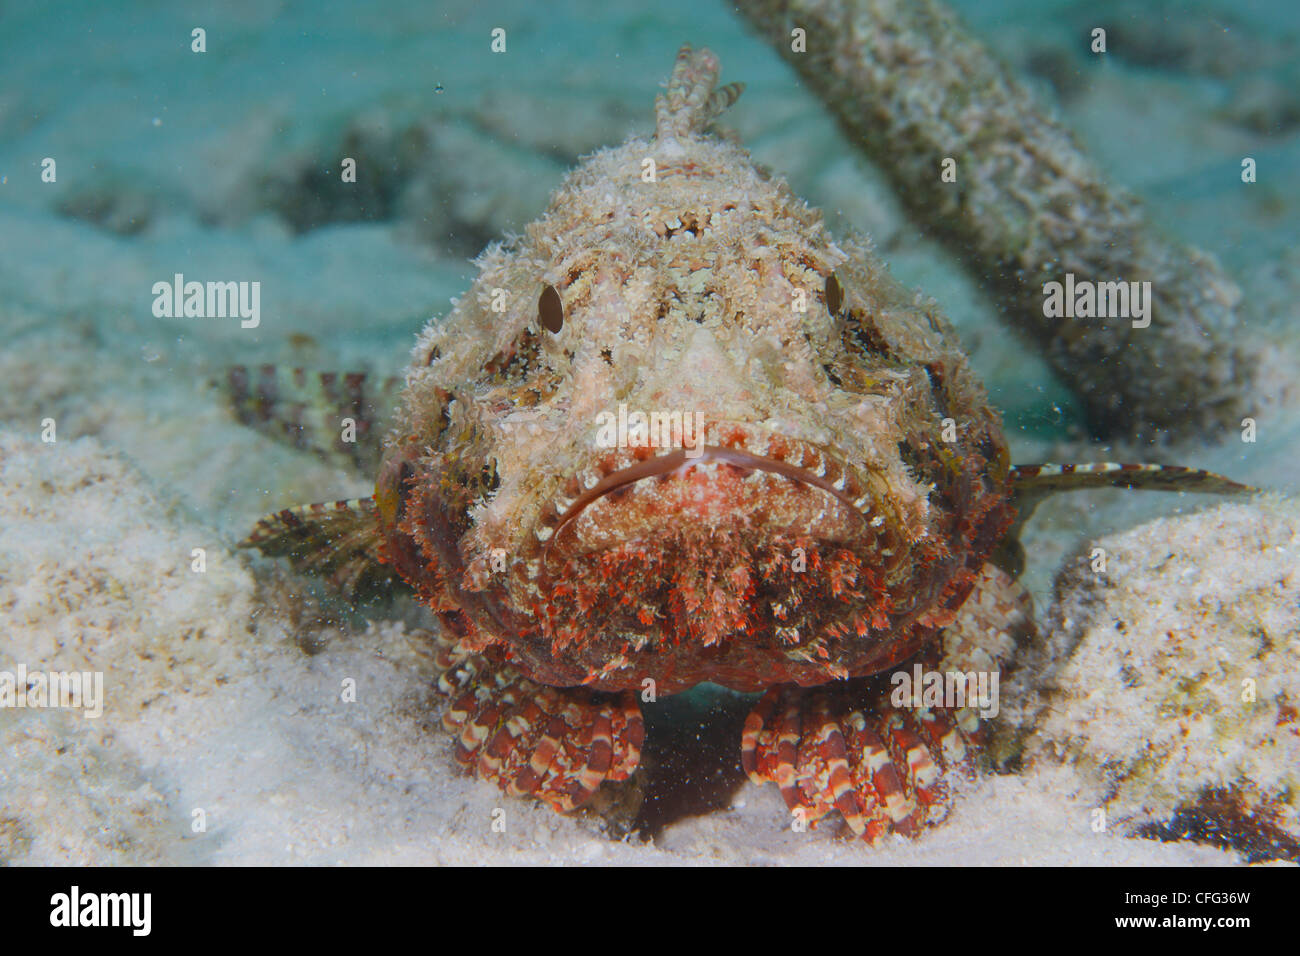 A spotted scorpion fish looks like coral rubble as it awaits prey. Stock Photo